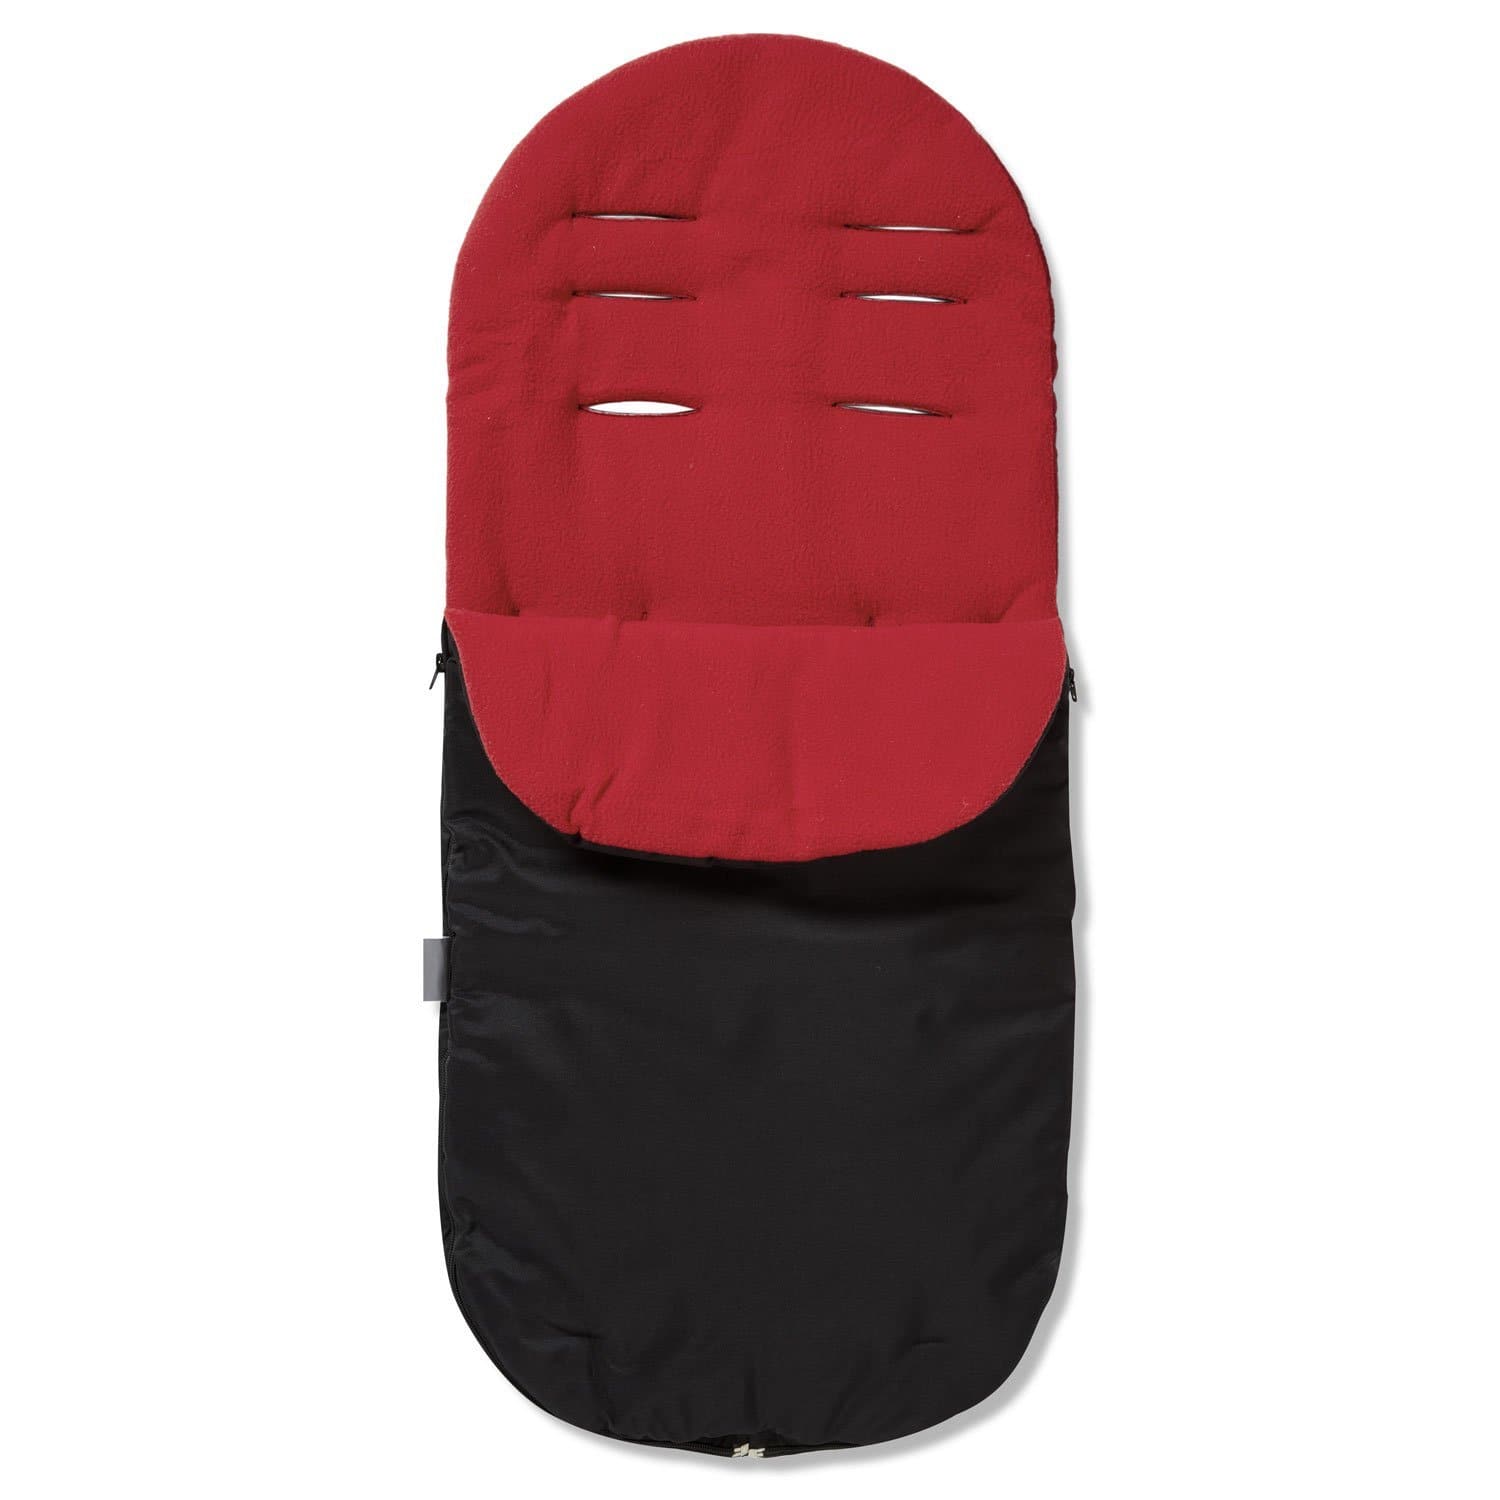 Footmuff / Cosy Toes Compatible with BOB - Red / Fits All Models | For Your Little One